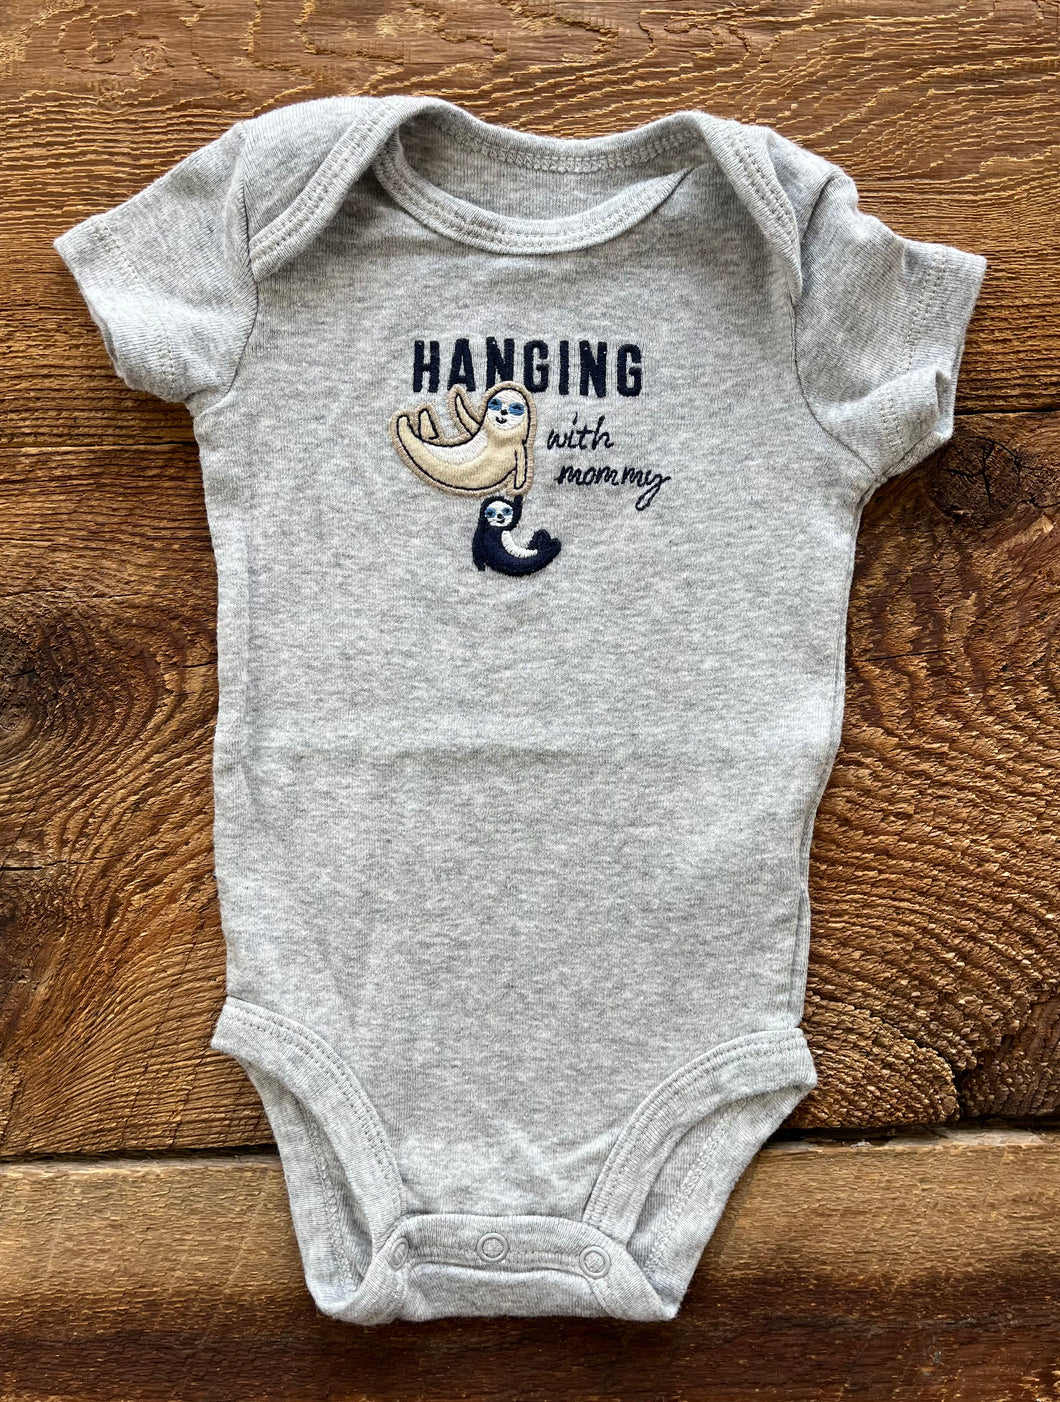 Carter’s 3M Hanging with Mommy Onesie